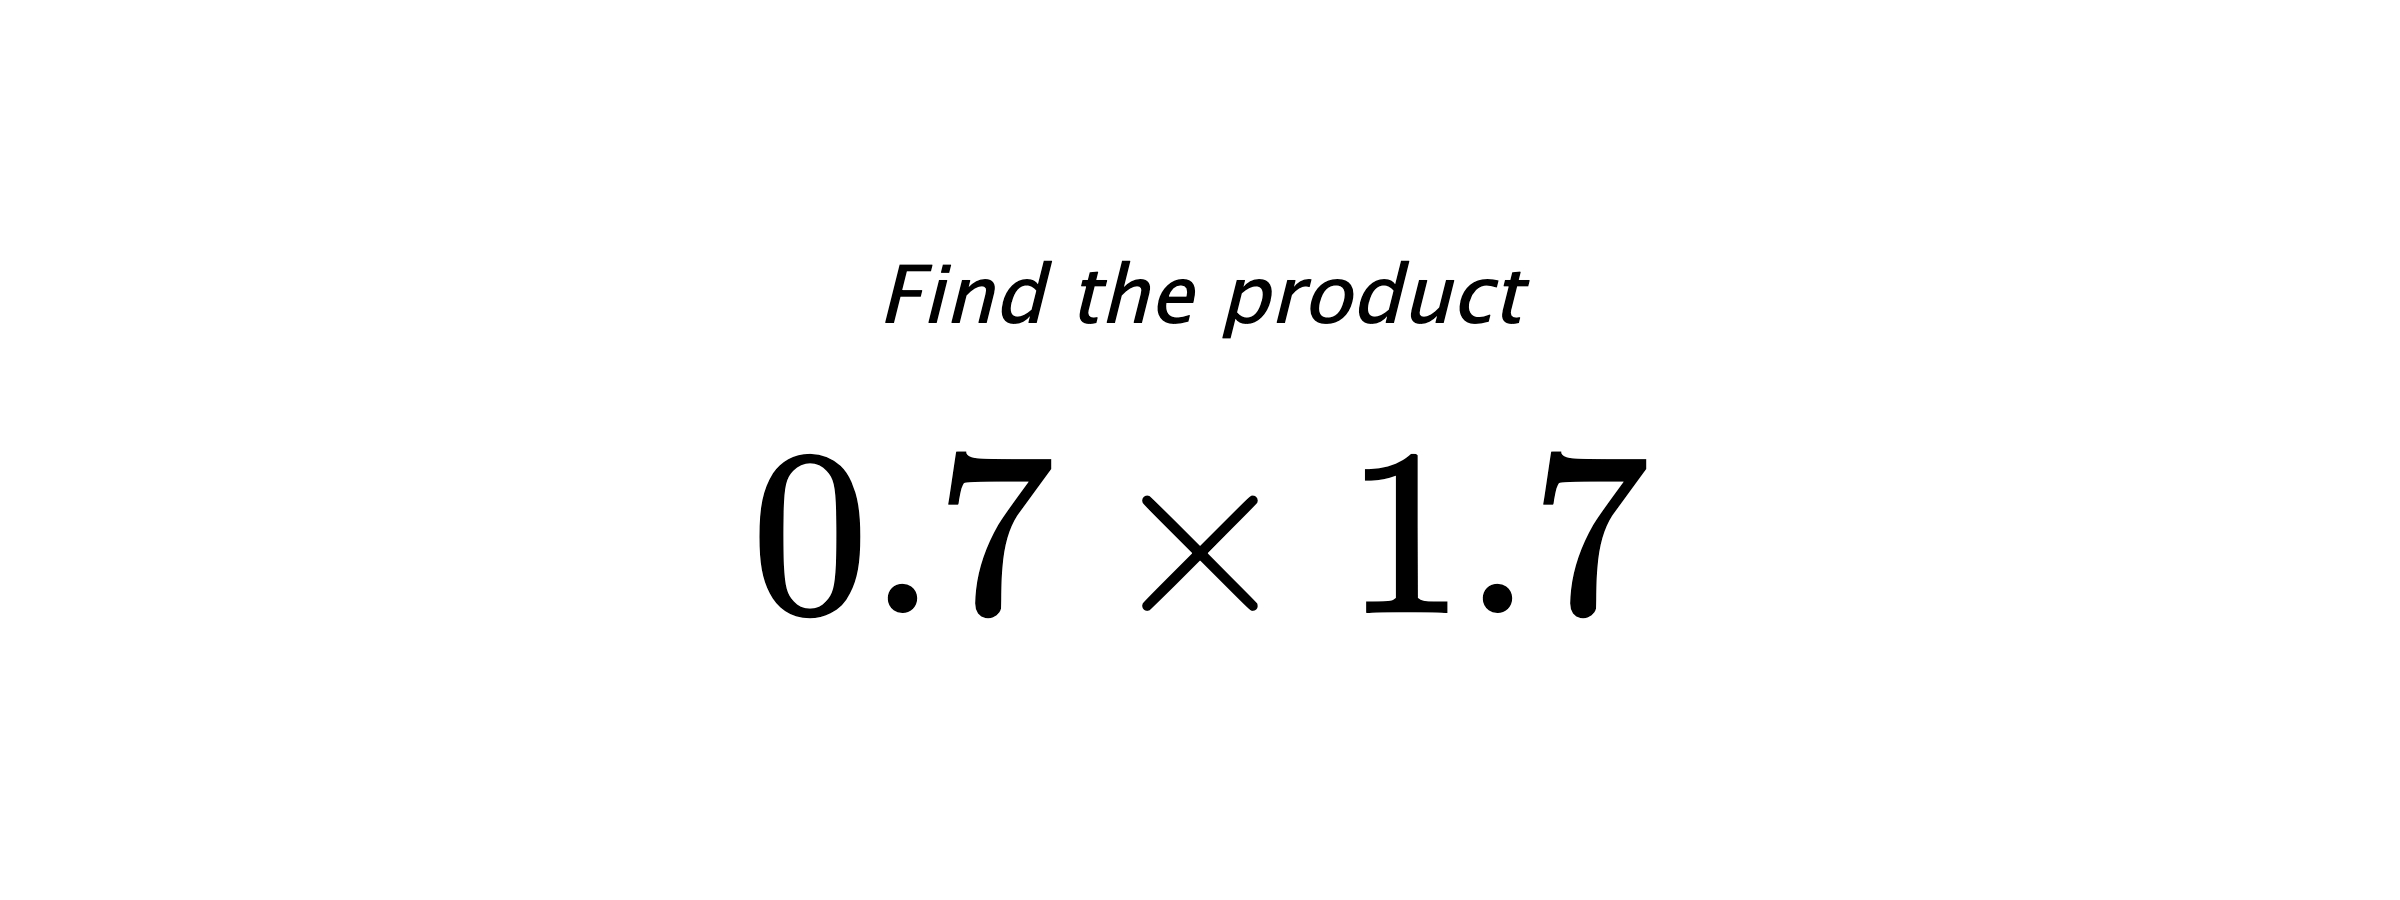 Find the product $ 0.7 \times 1.7 $